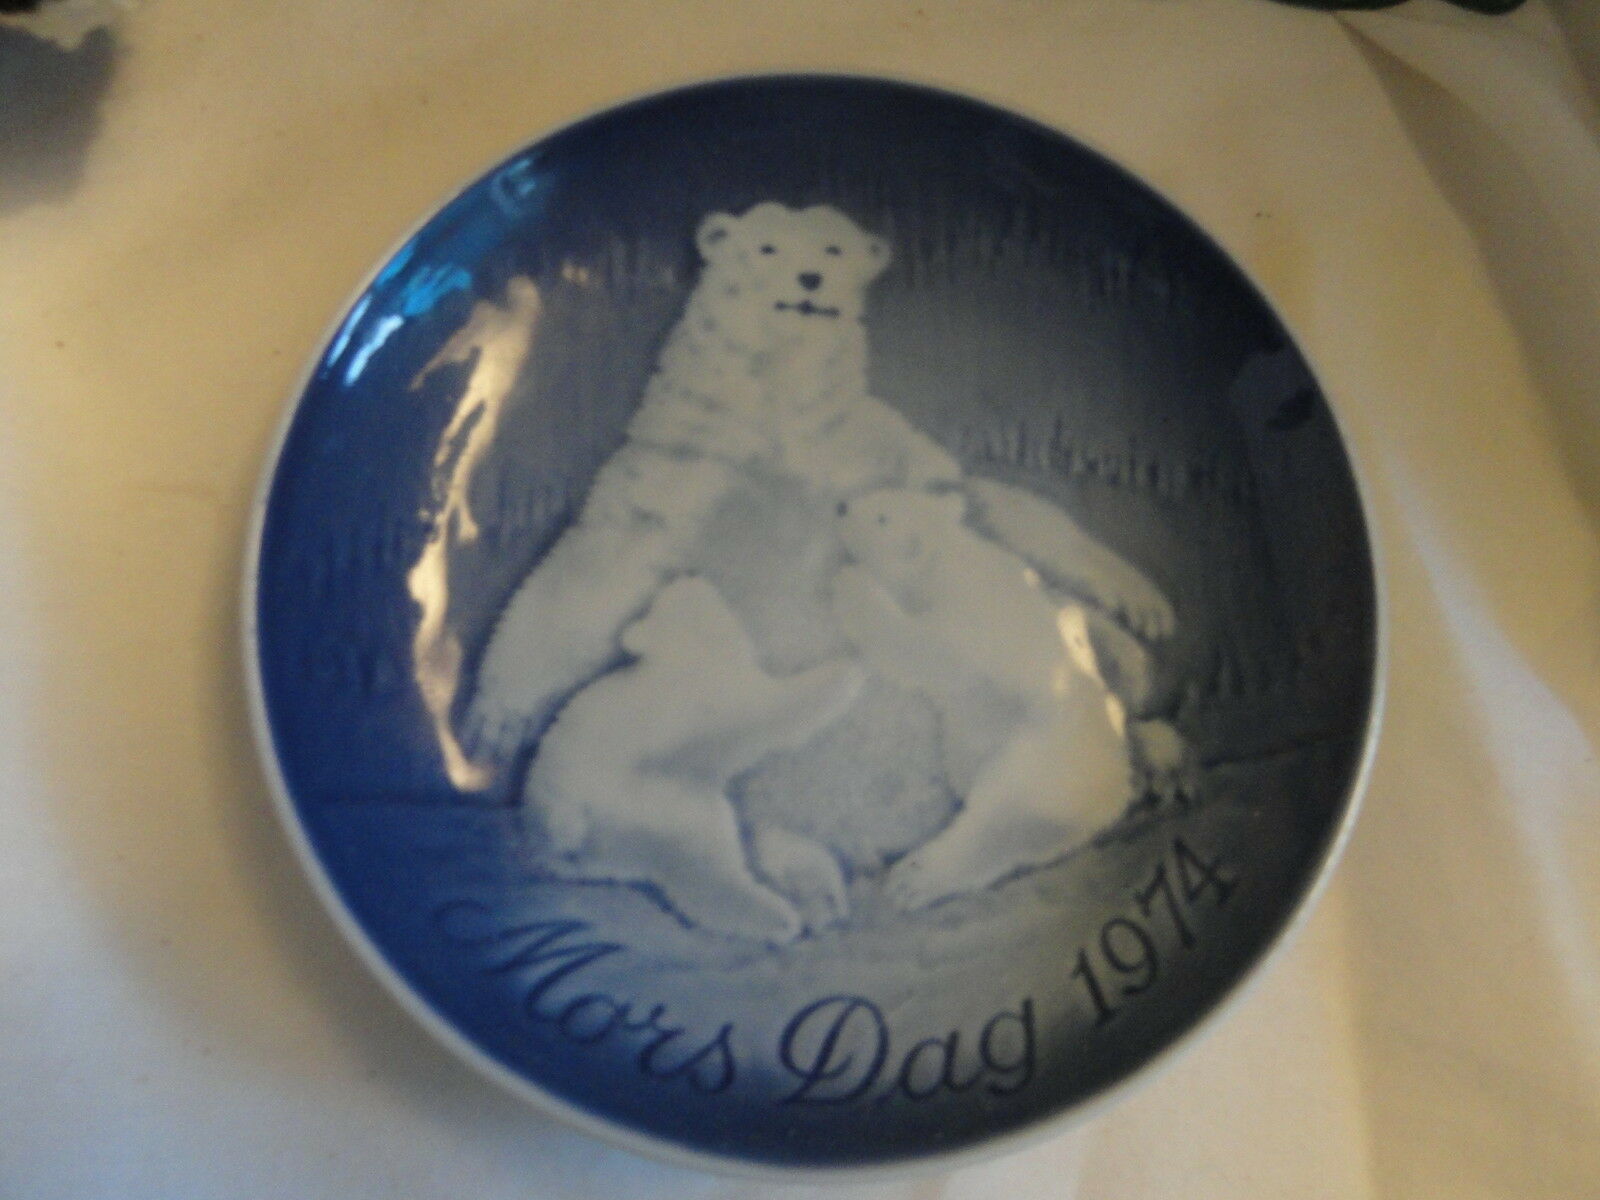 B&G Bing Grondahl Mothers Day Collectible Plate 1974 Blue & White - $9.99